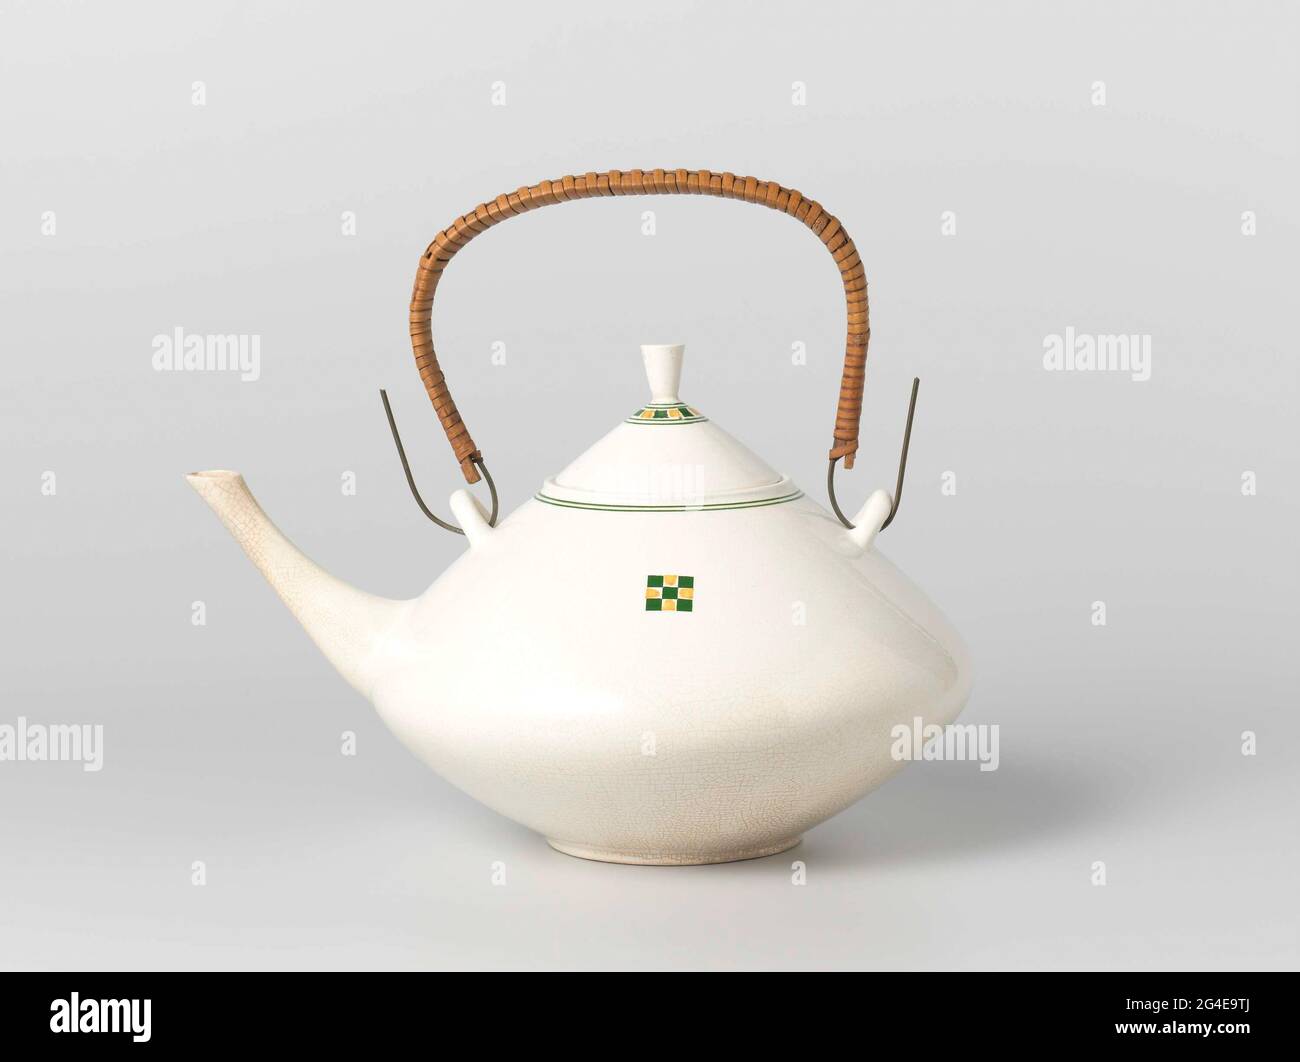 https://c8.alamy.com/comp/2G4E9TJ/tea-kettle-of-pottery-decorated-with-green-and-yellow-squares-and-a-double-green-trim-along-the-edges-the-boiler-has-a-long-spout-and-a-reeds-wound-with-reeds-associated-heads-and-saucers-bk-1972-135-b-c-2G4E9TJ.jpg